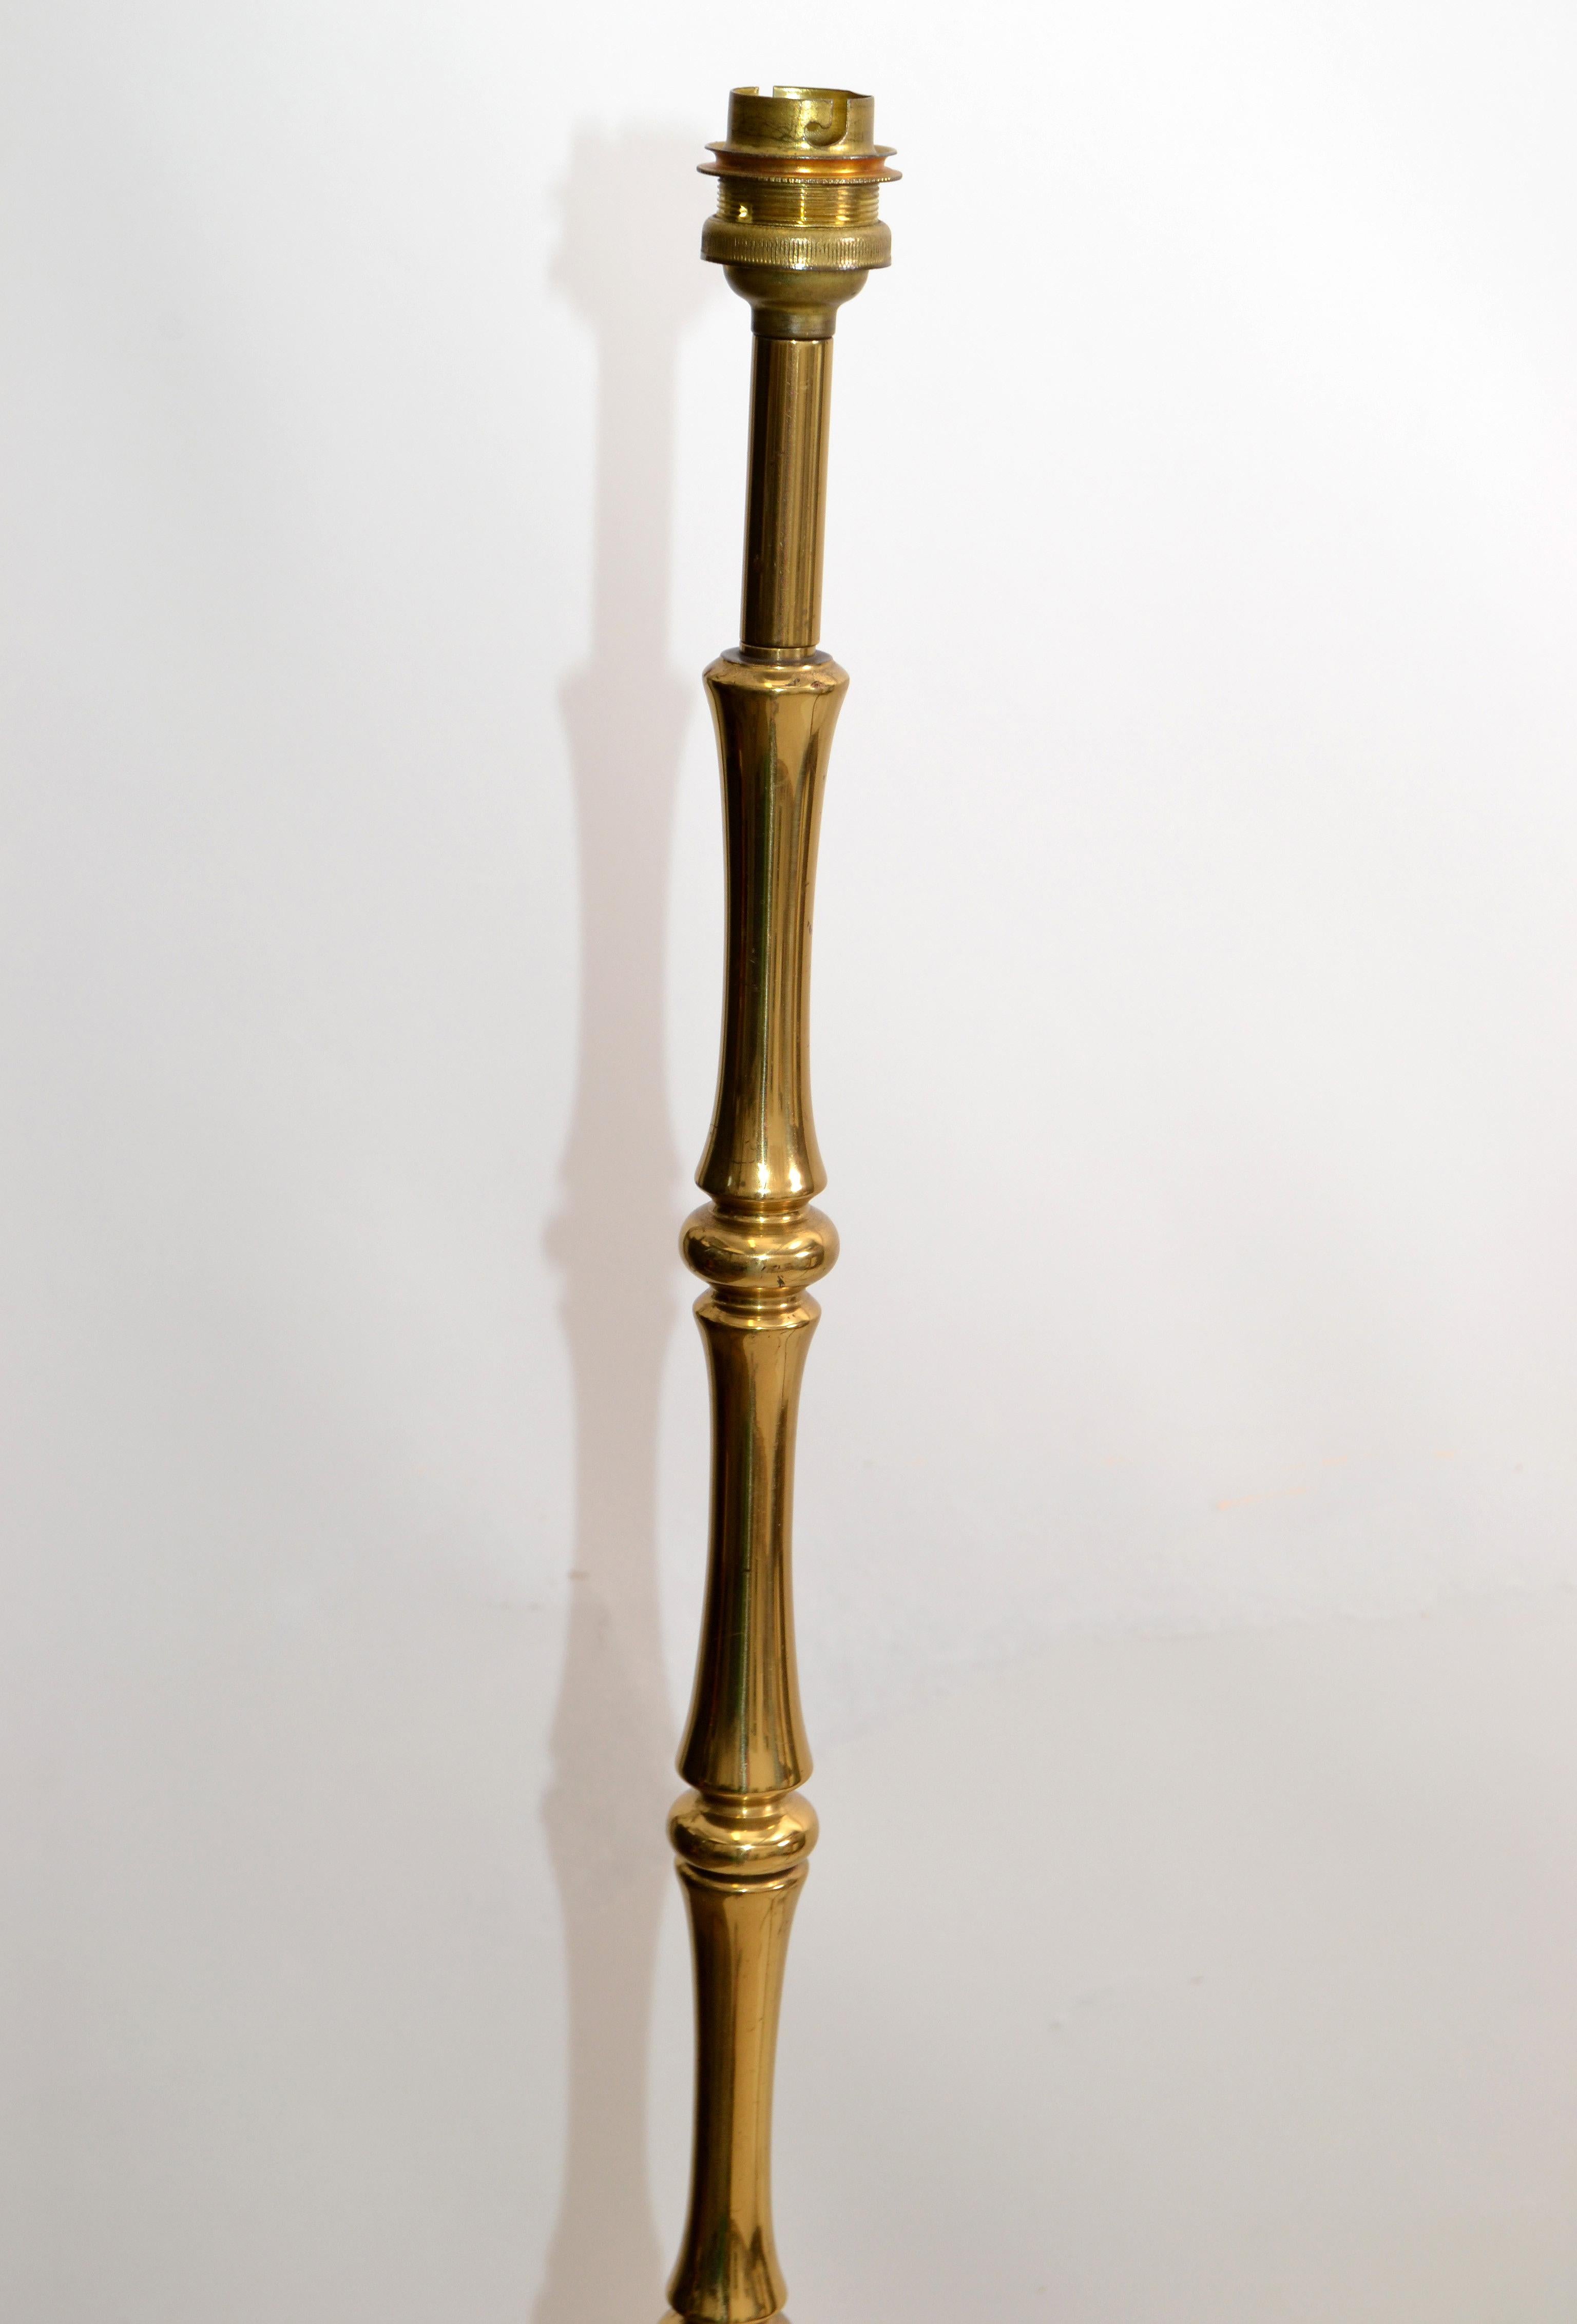 Maison Baguès Brass Mid-Century Modern Floor Lamp France 1950 Black Shade, Pair In Good Condition For Sale In Miami, FL